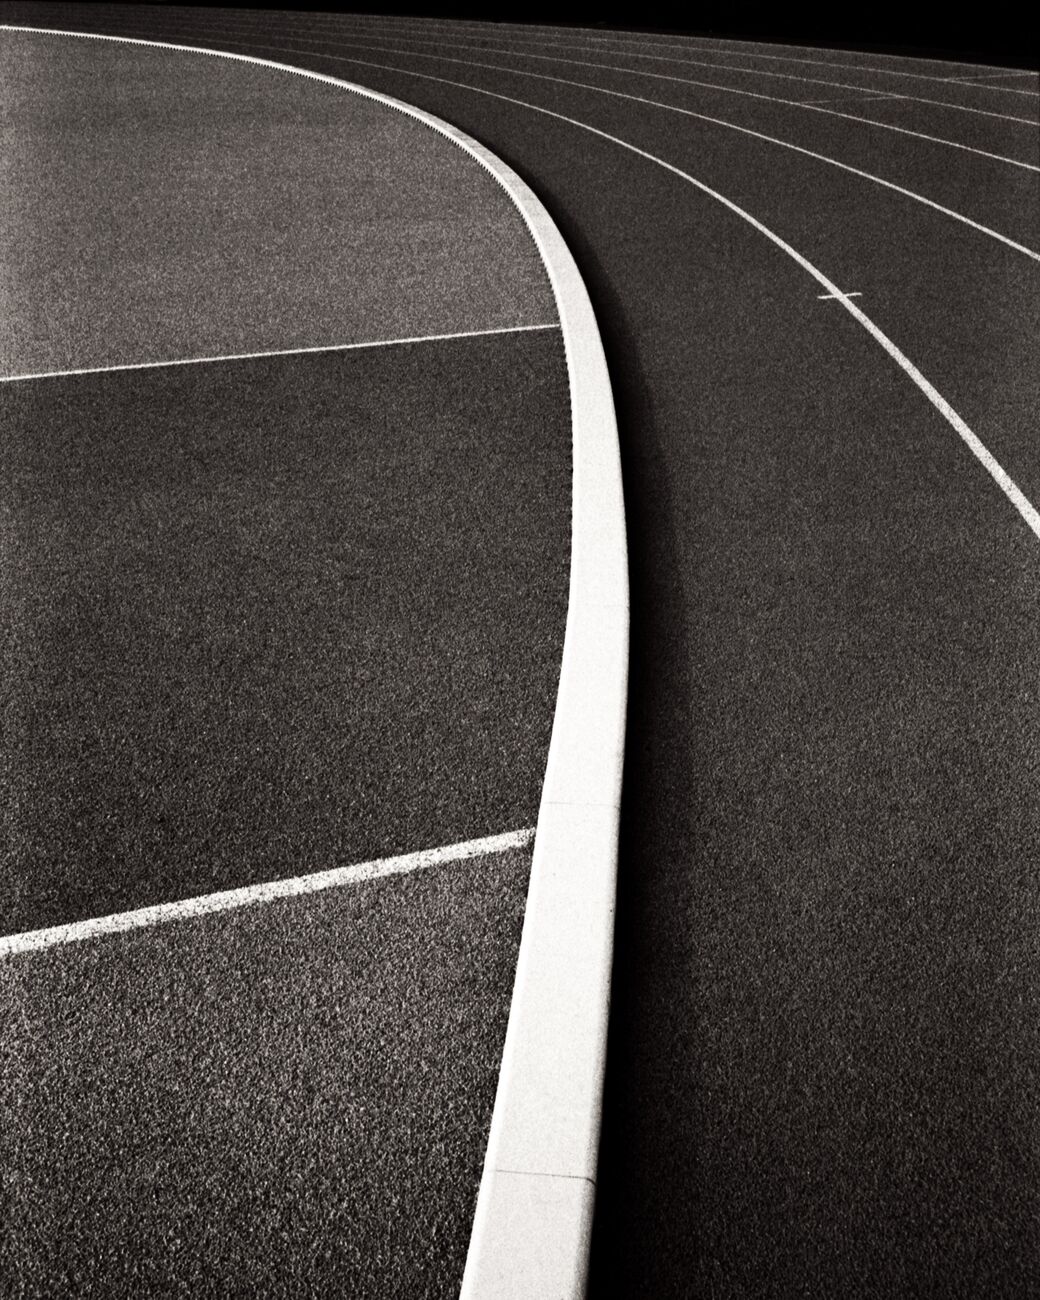 Photograph print 22 x 27.6 in, Running Track. Ref-11621-5 - Denis Olivier Photography